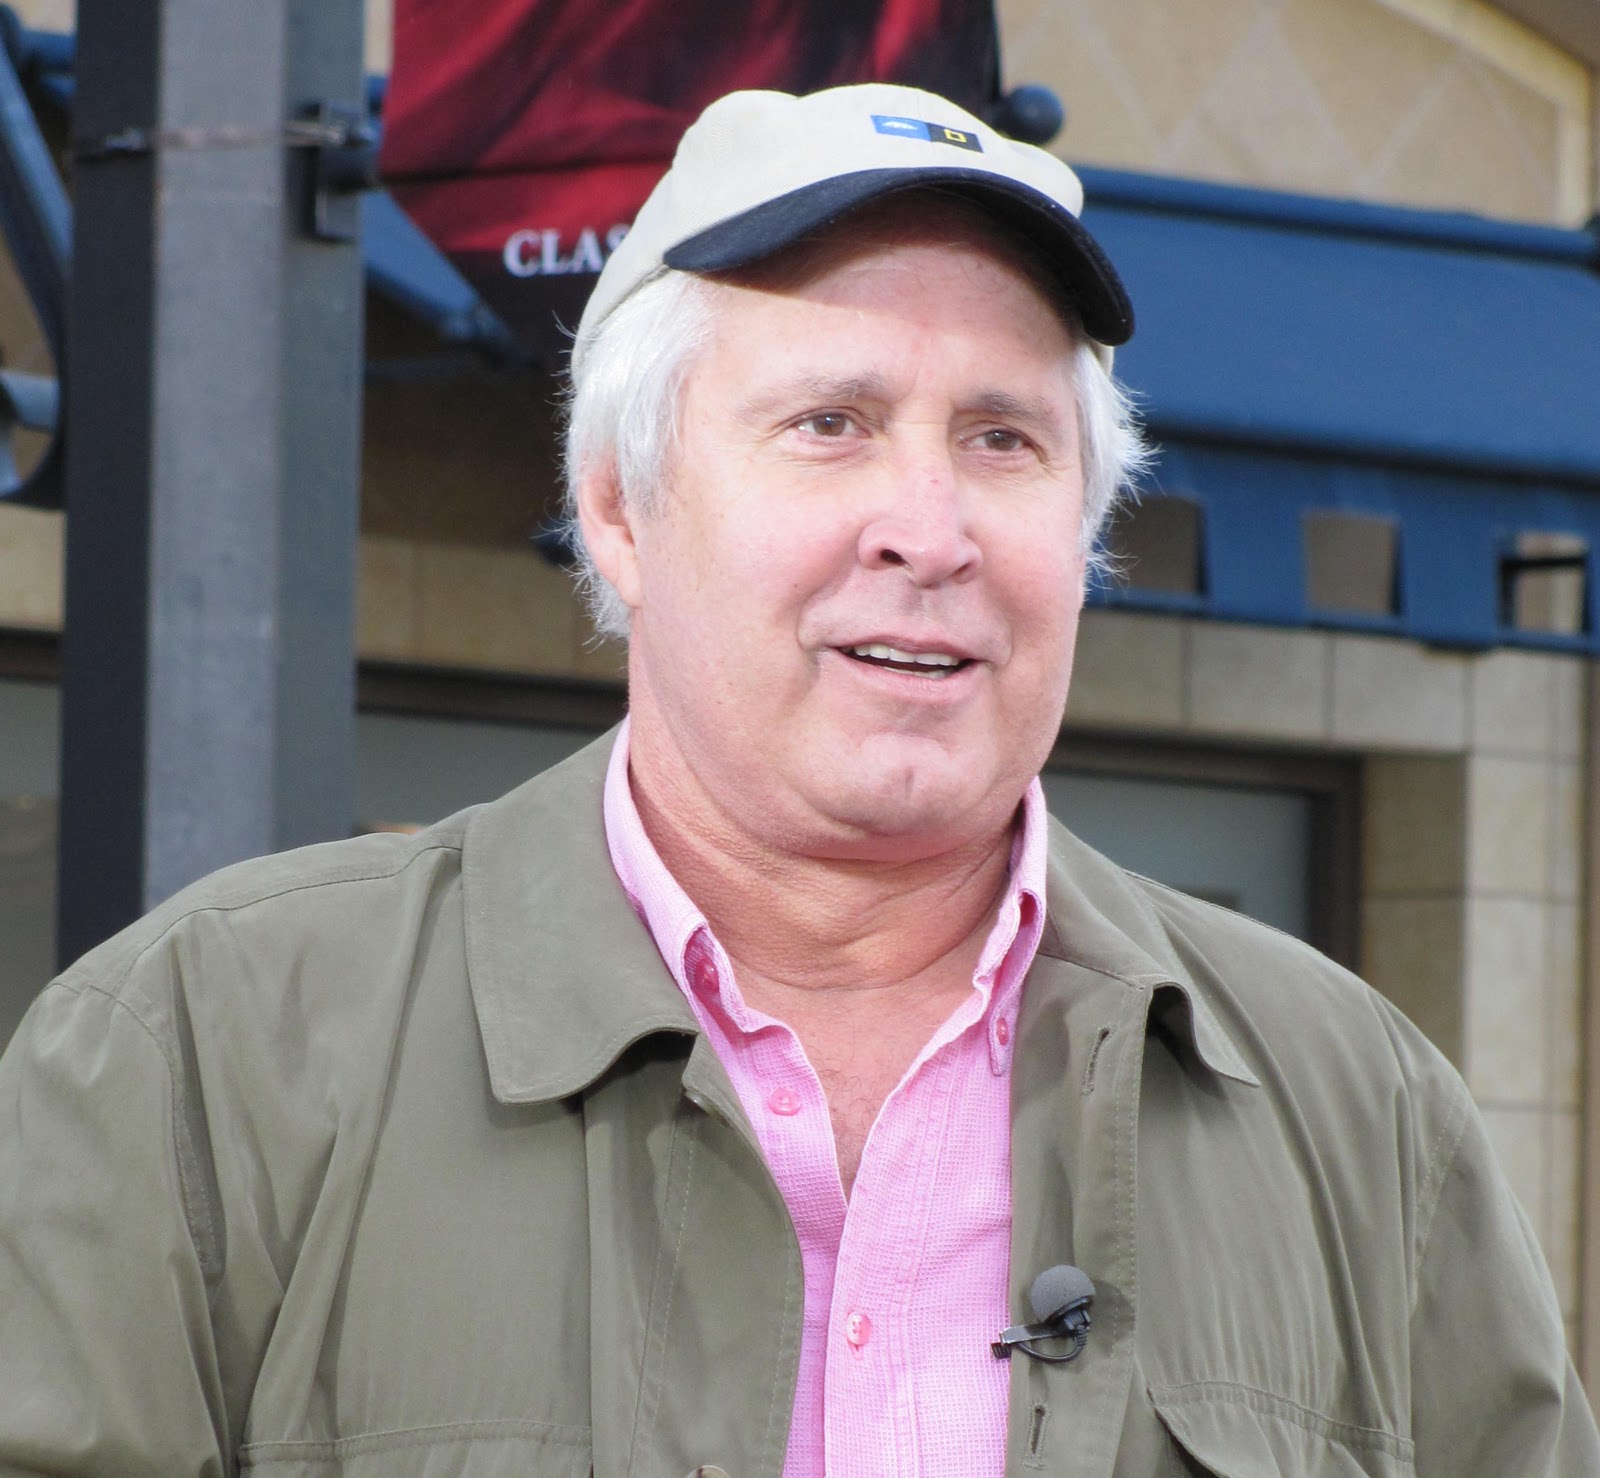 Chevy Chase in Funny Farm